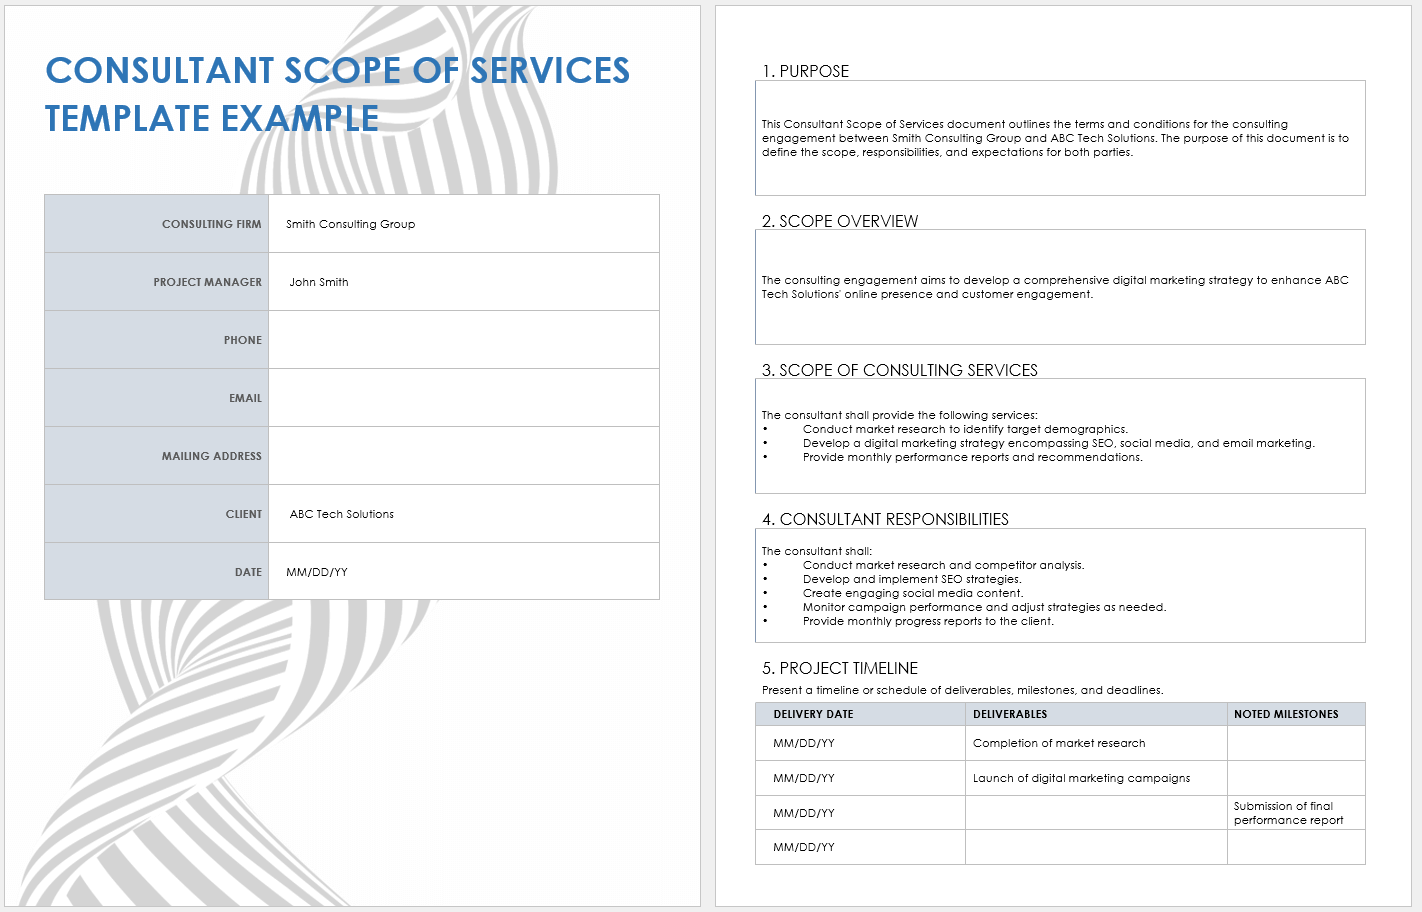 Consultant Scope of Services Example Template